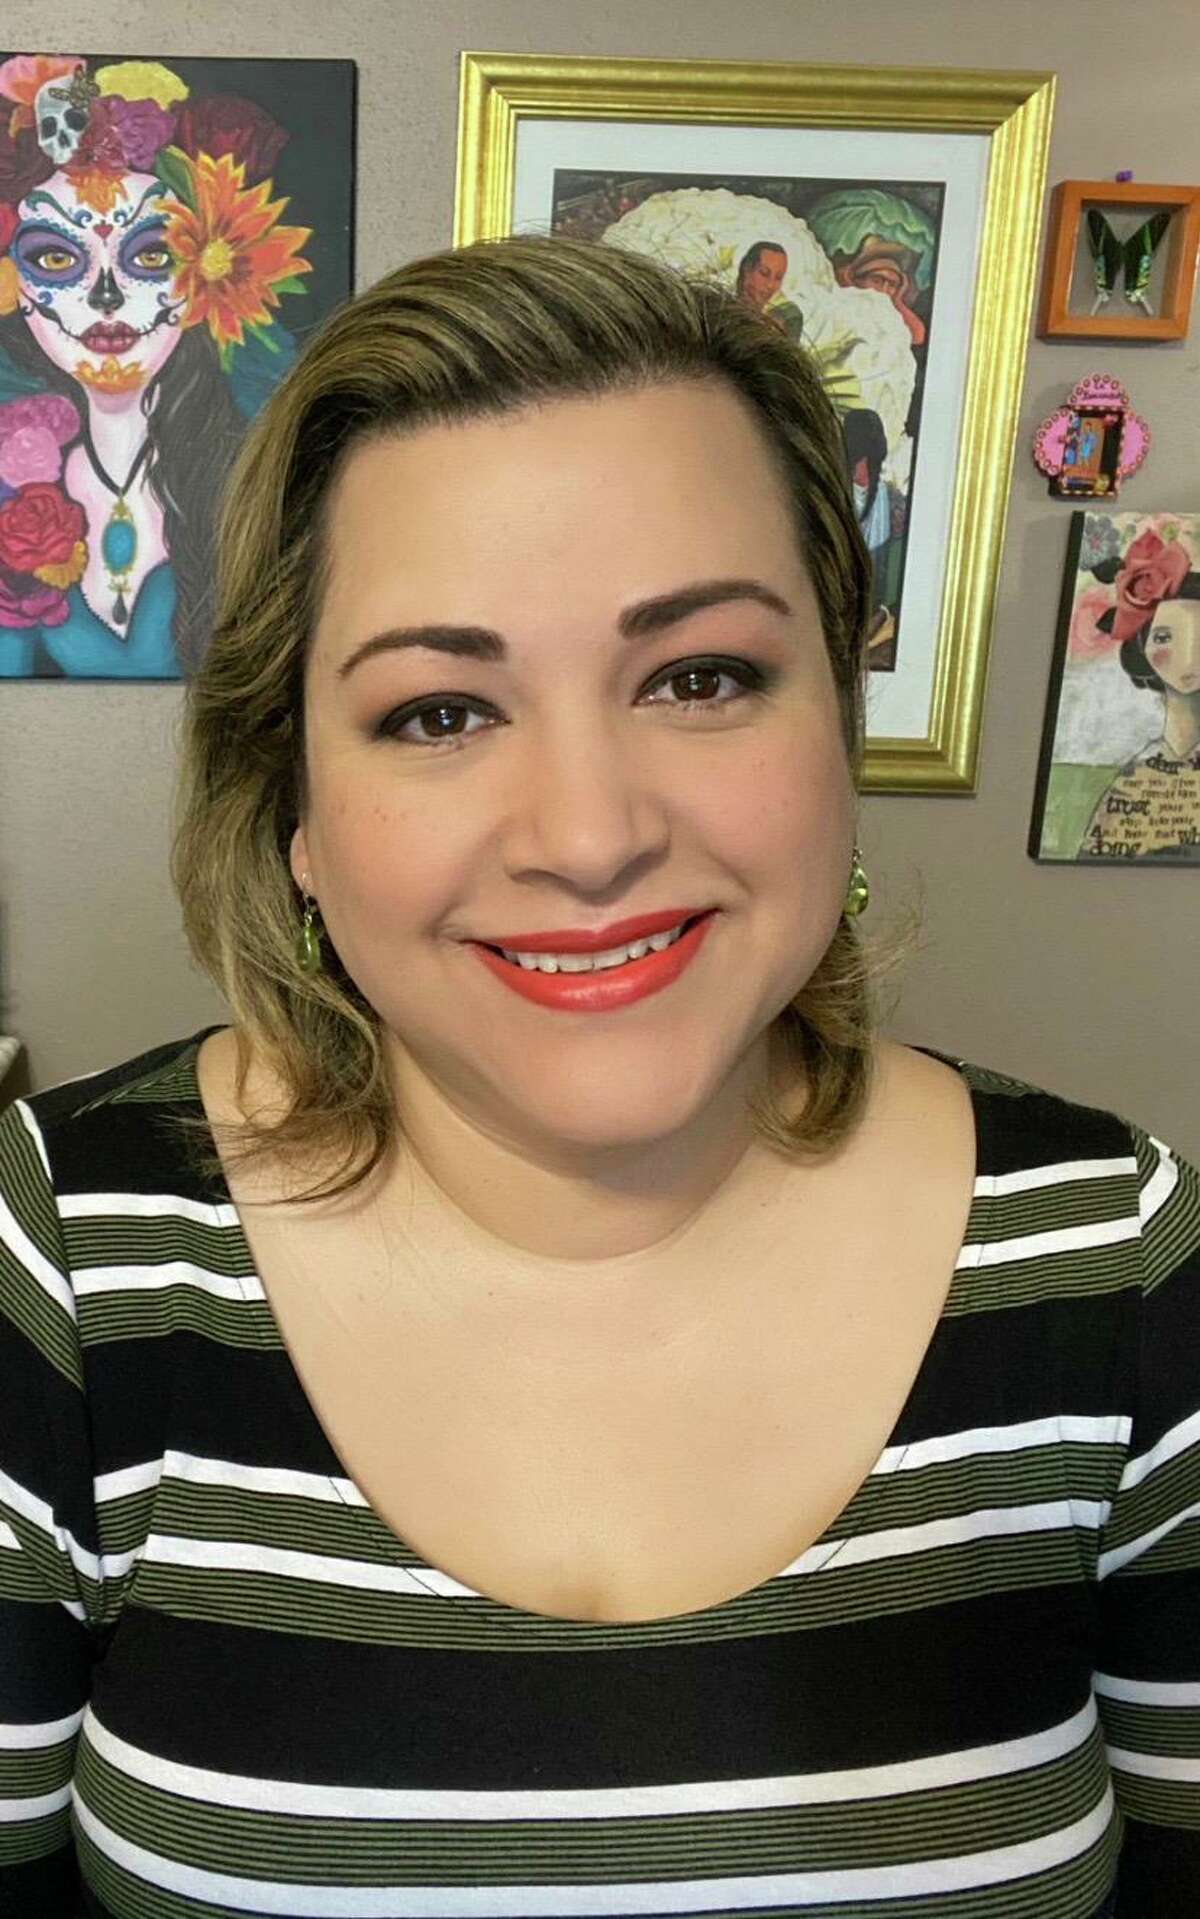 Virginia Elizondo, who ran unsuccessfully for the Spring Branch ISD Board of Trustees in 2015 and 2021, has filed a lawsuit against the district and its trustees claiming a violation of the Voting Rights Act